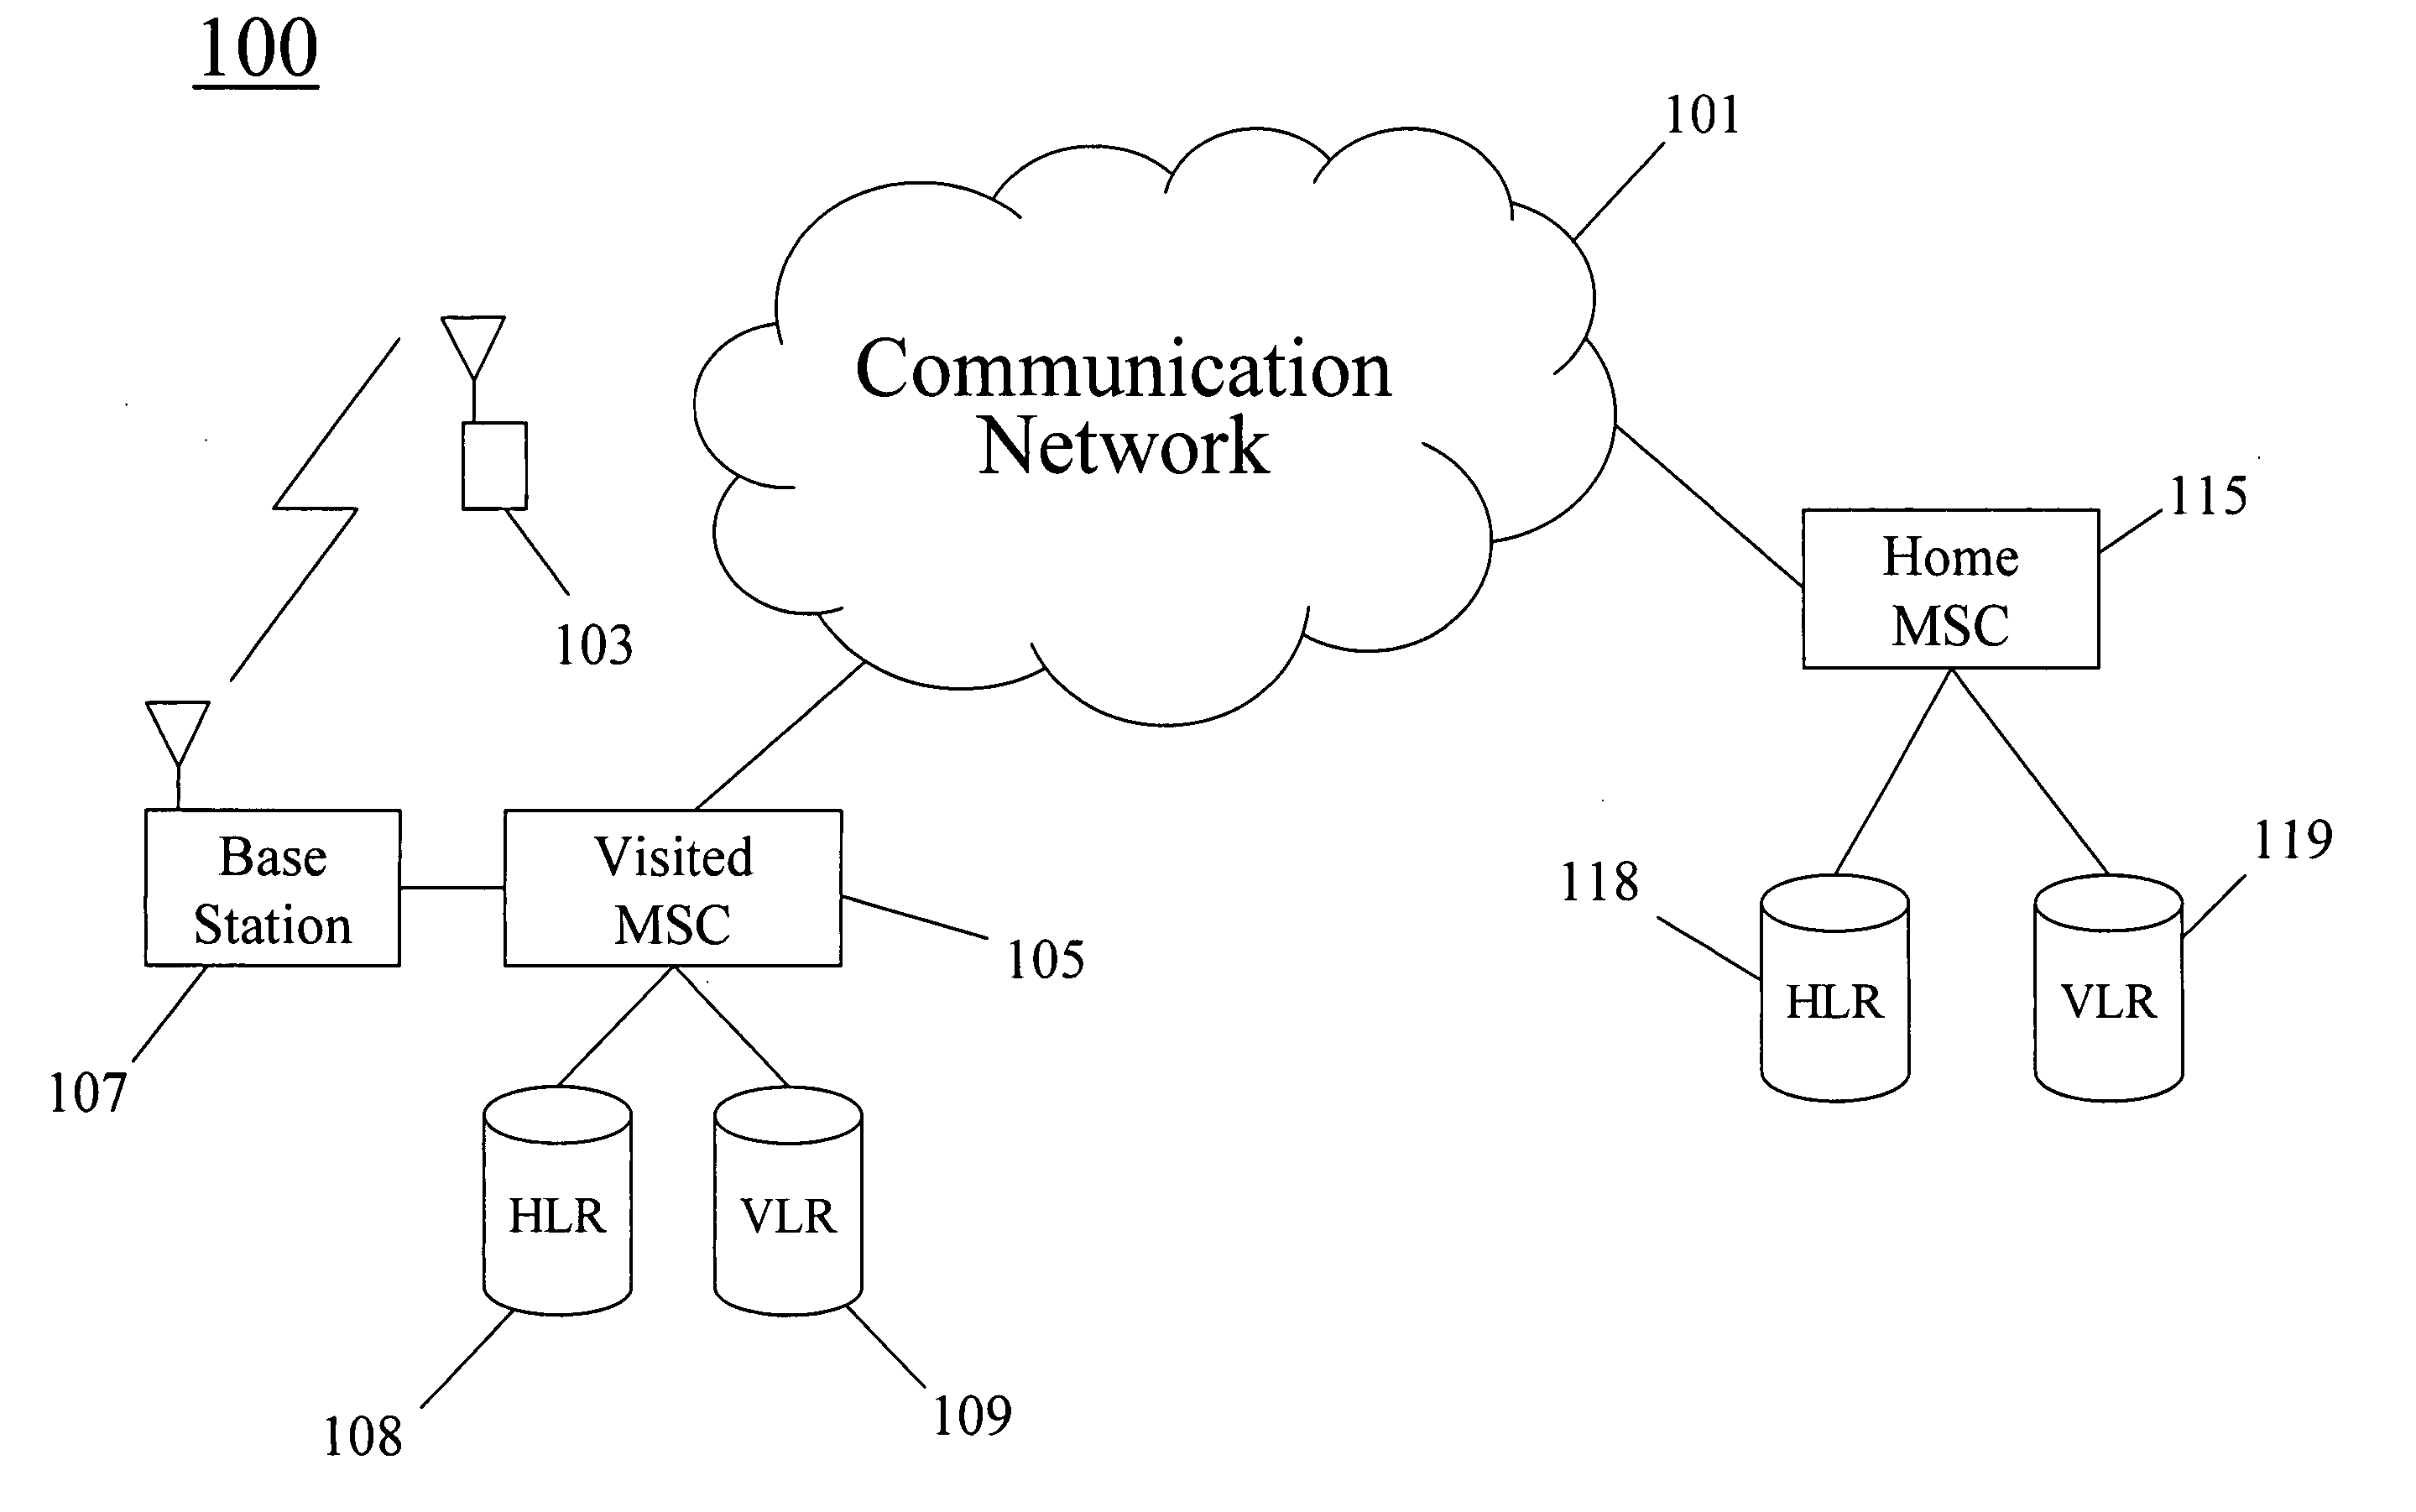 Method for assigning an emergency temporary directory number to a roaming mobile unit